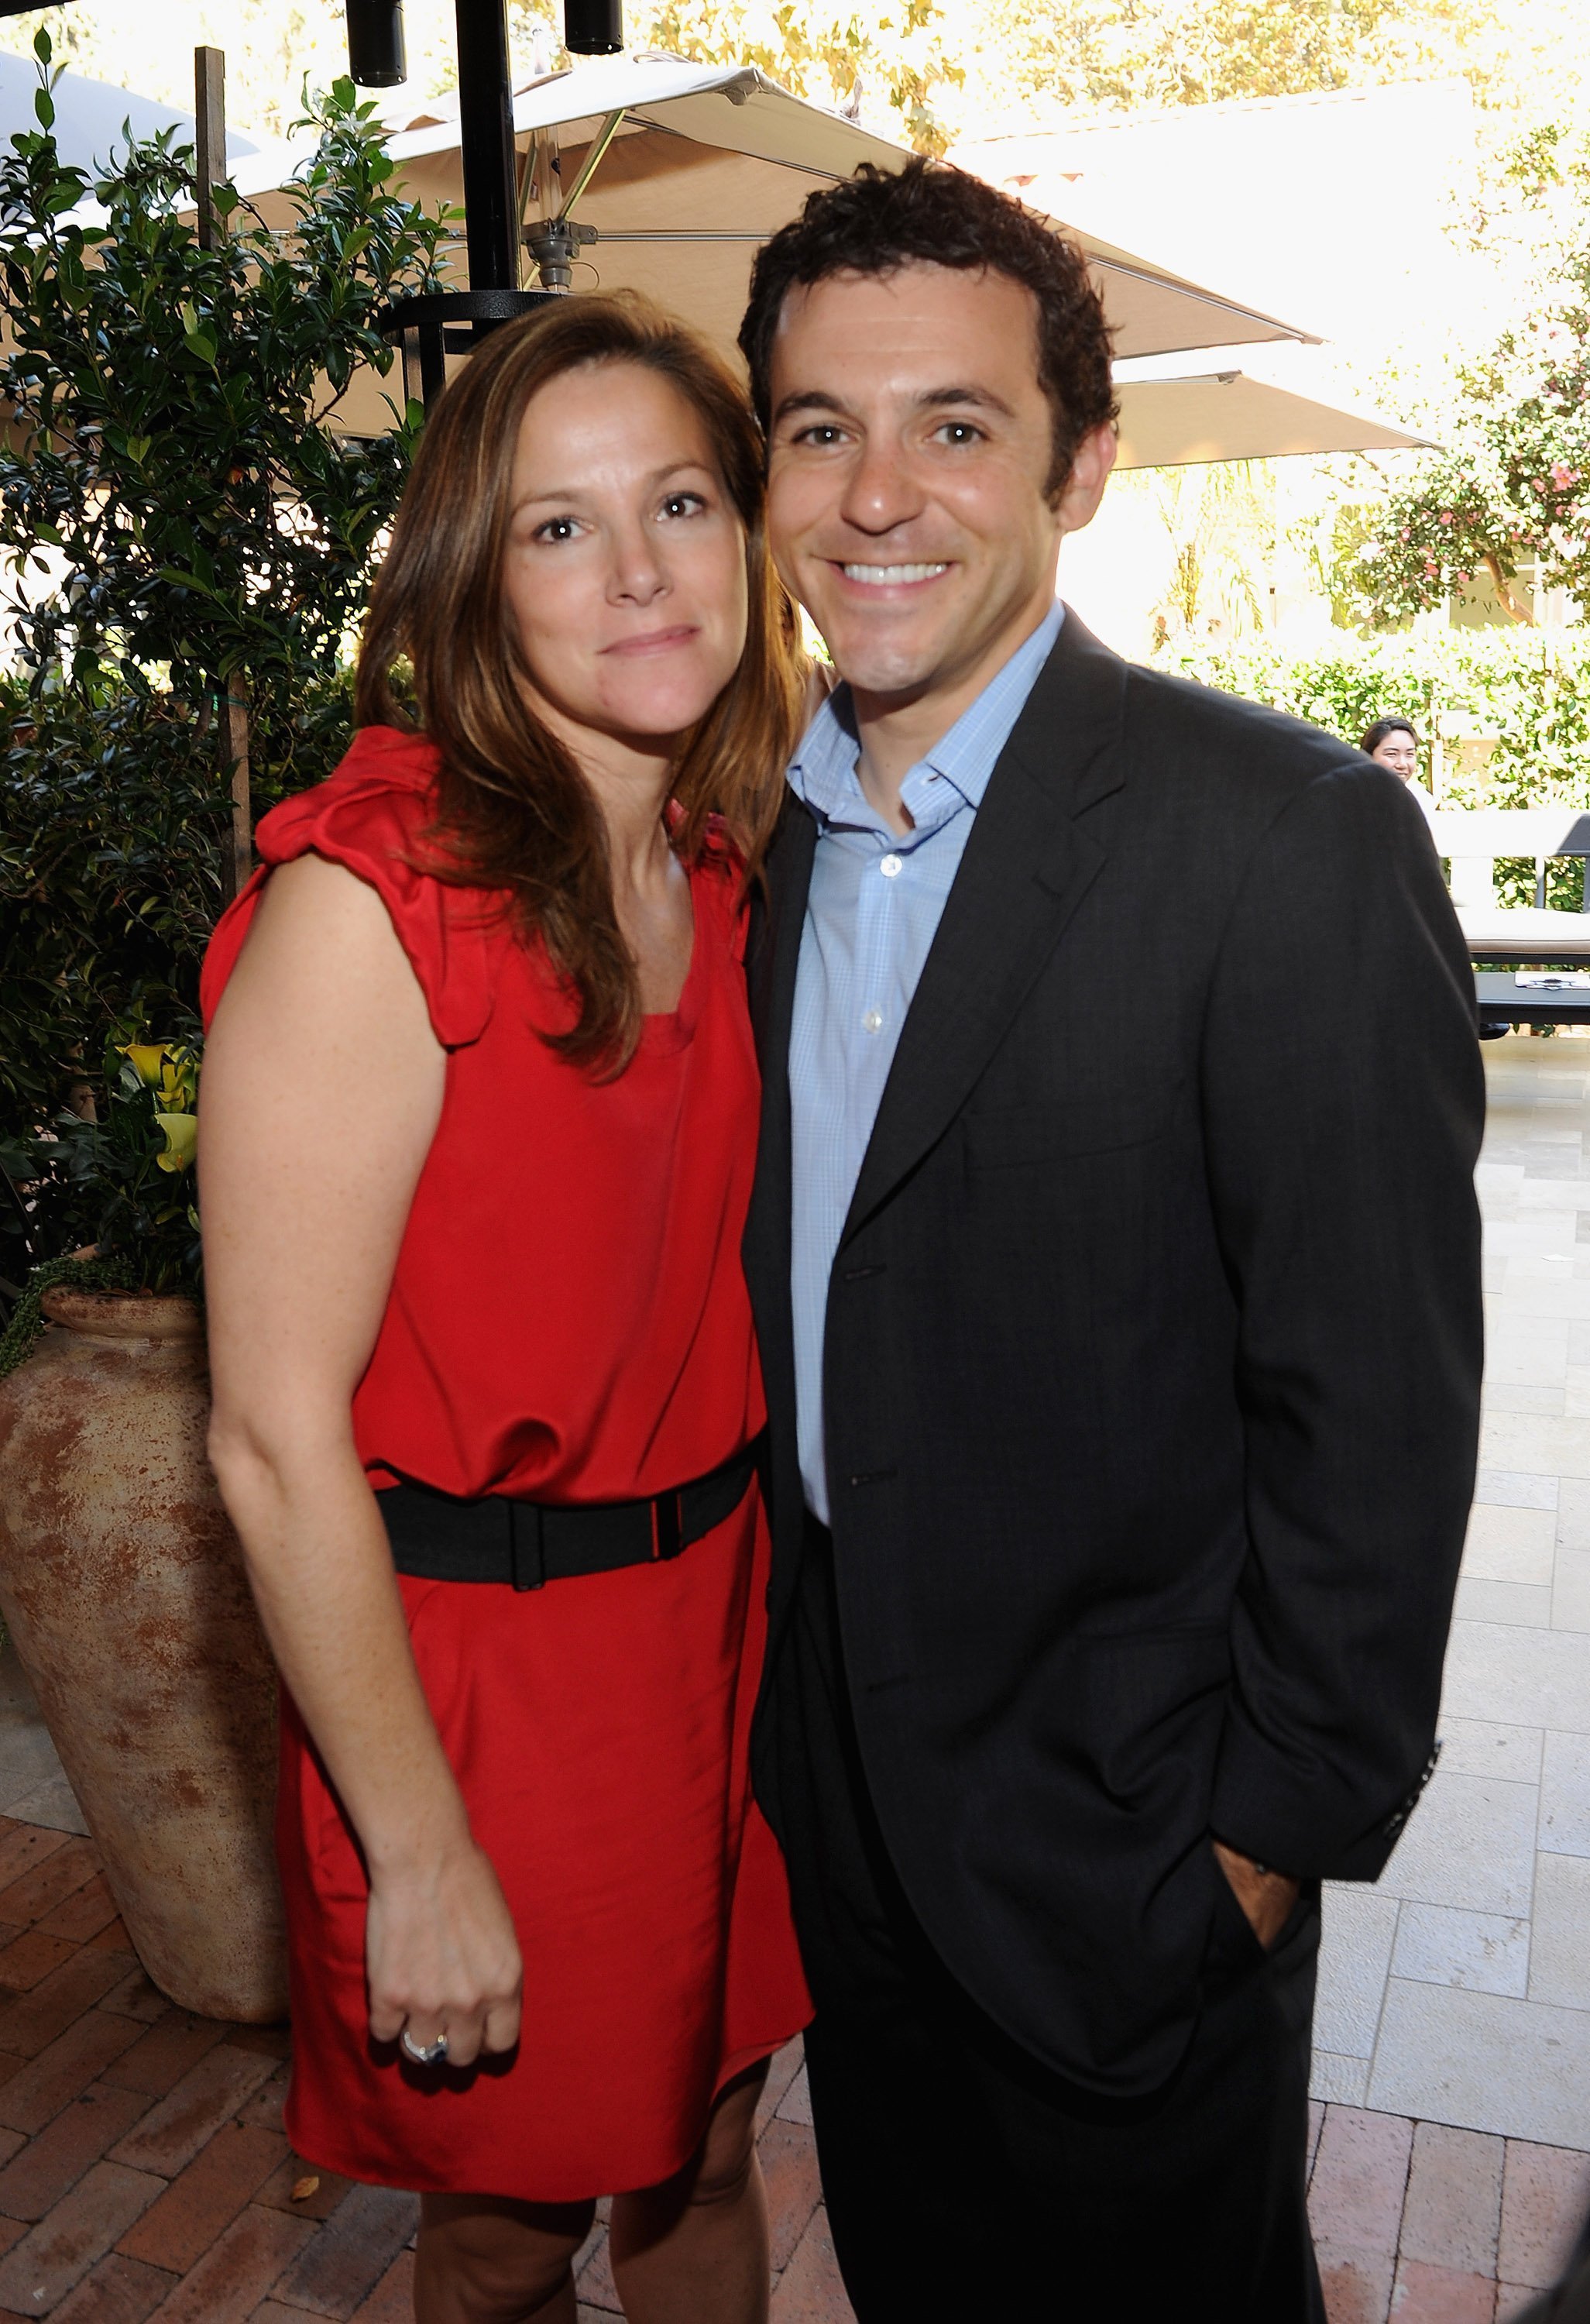 Fred Savage and Jennifer Lynn Stone on October 16, 2011 in Belair, California | Source: Getty Images